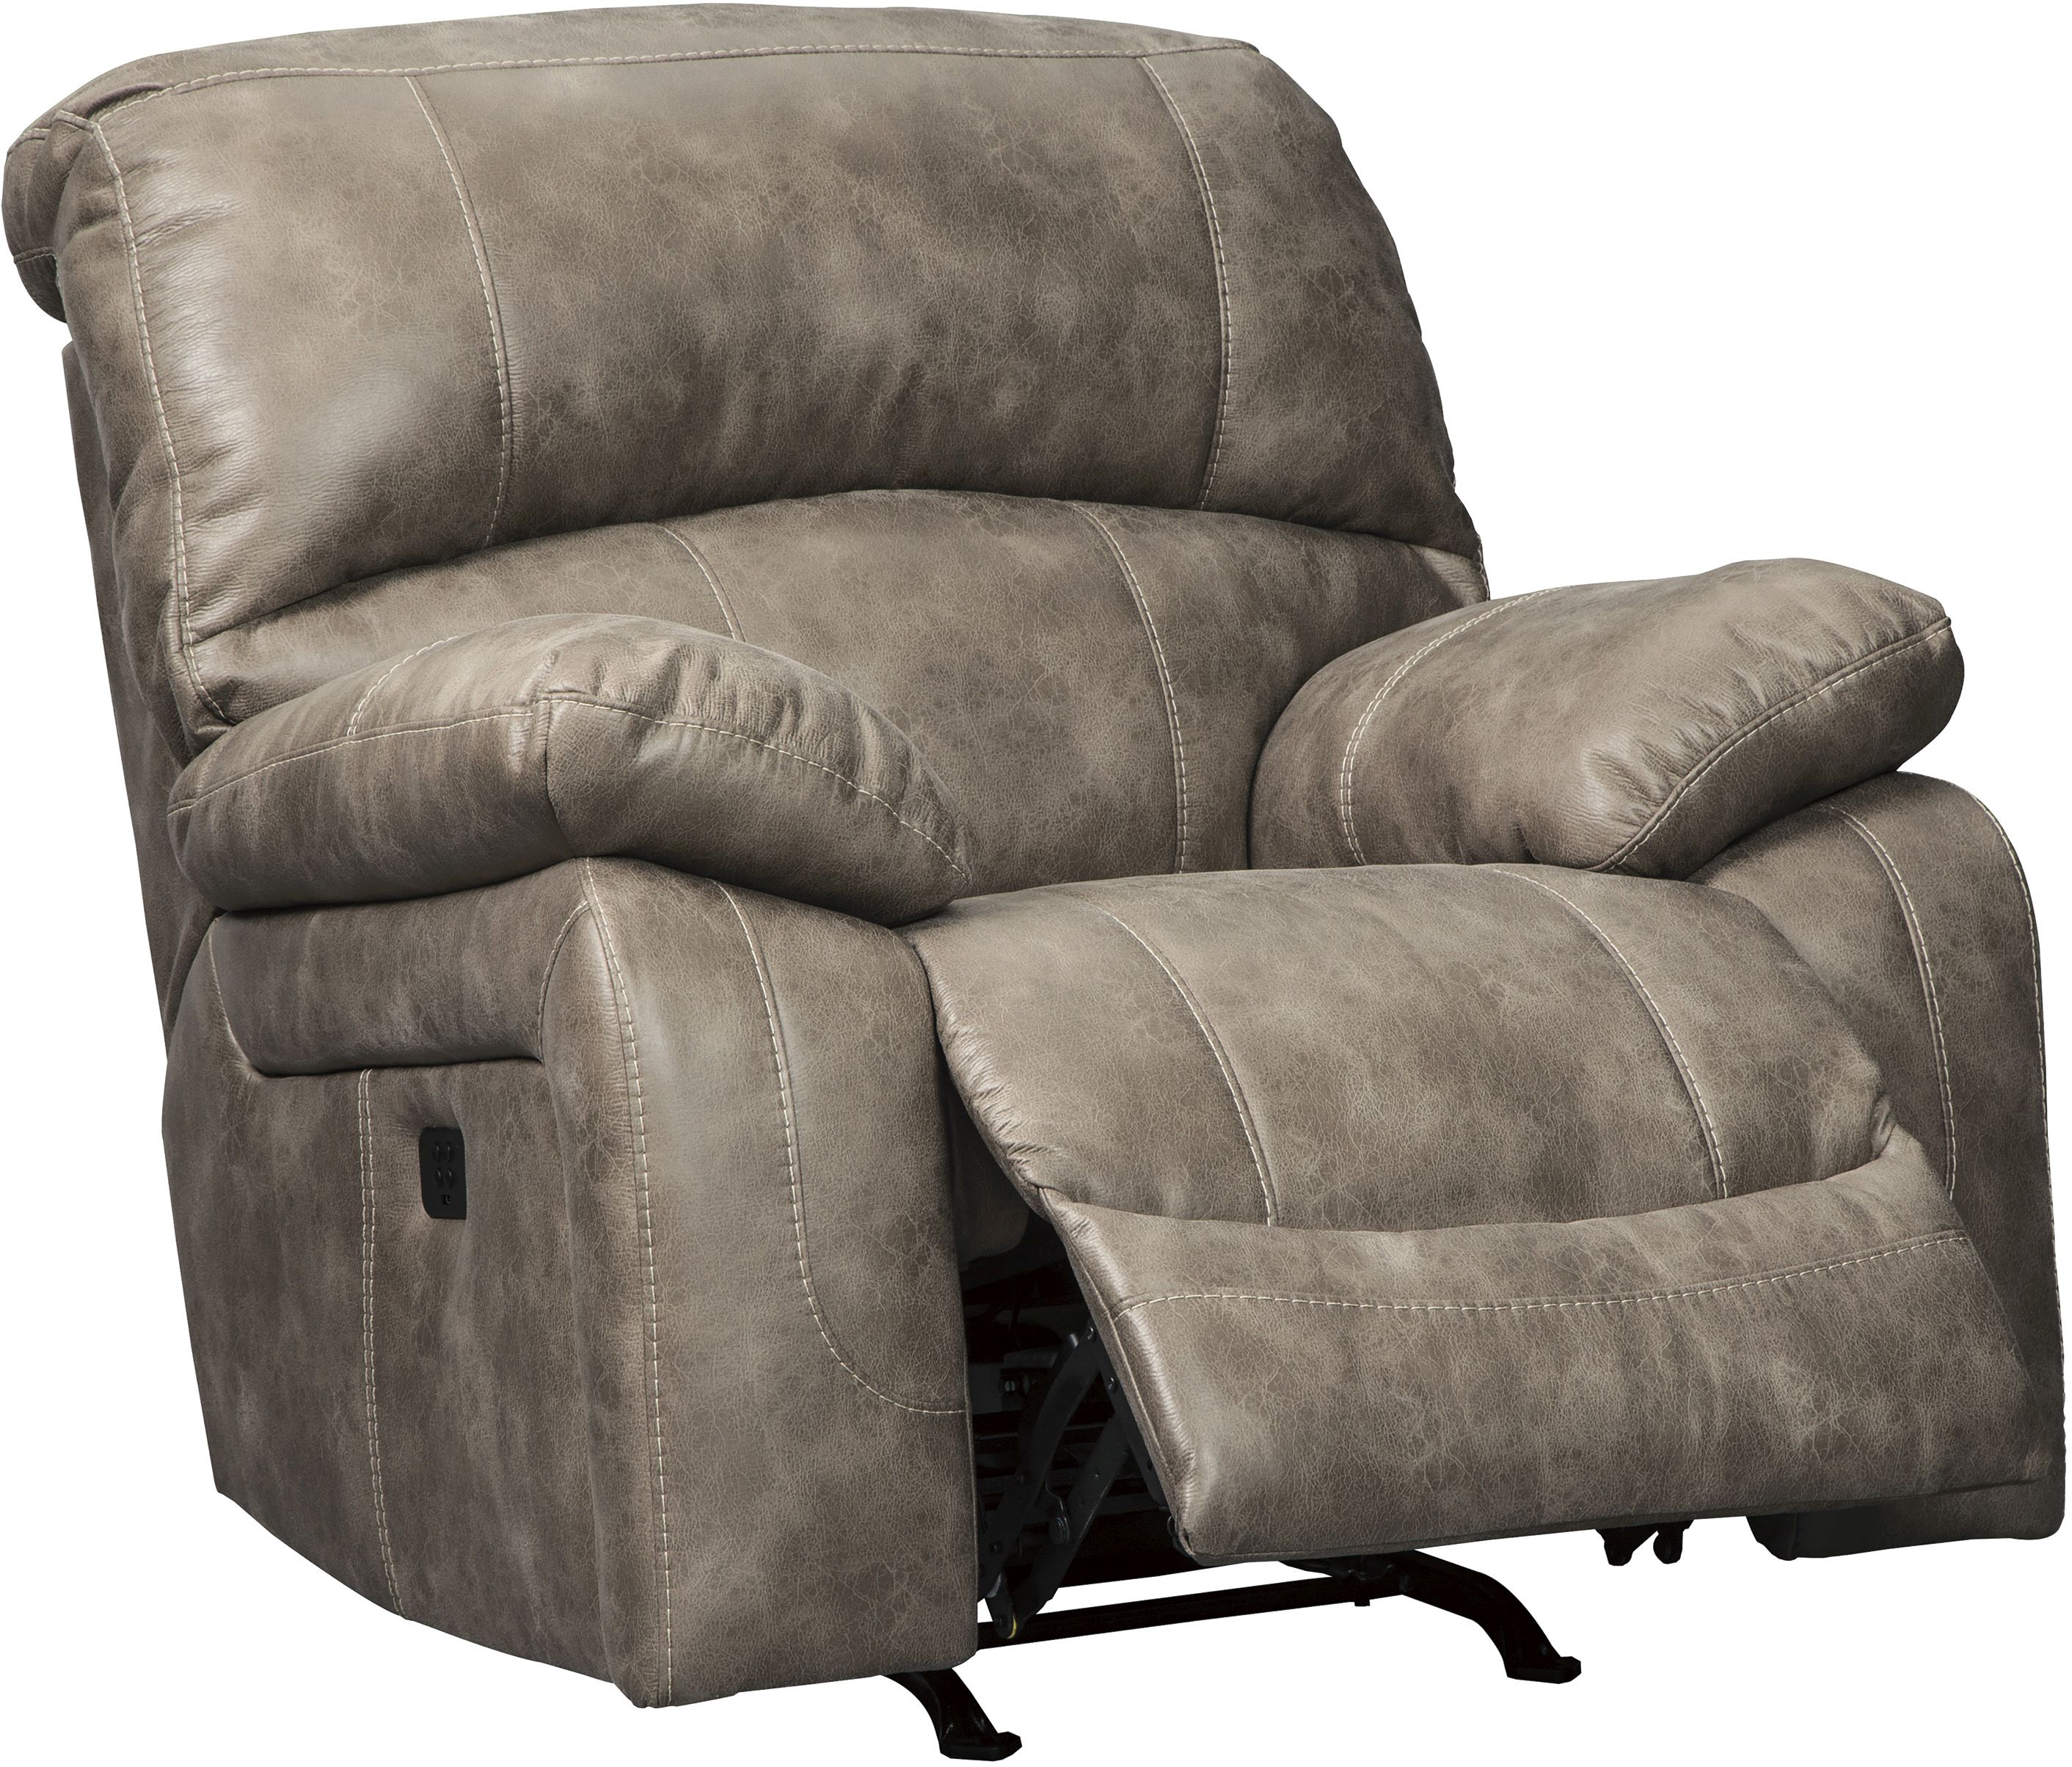 Signature Design by Ashley® Dunwell Driftwood Power Recliner with Adjustable Headrest